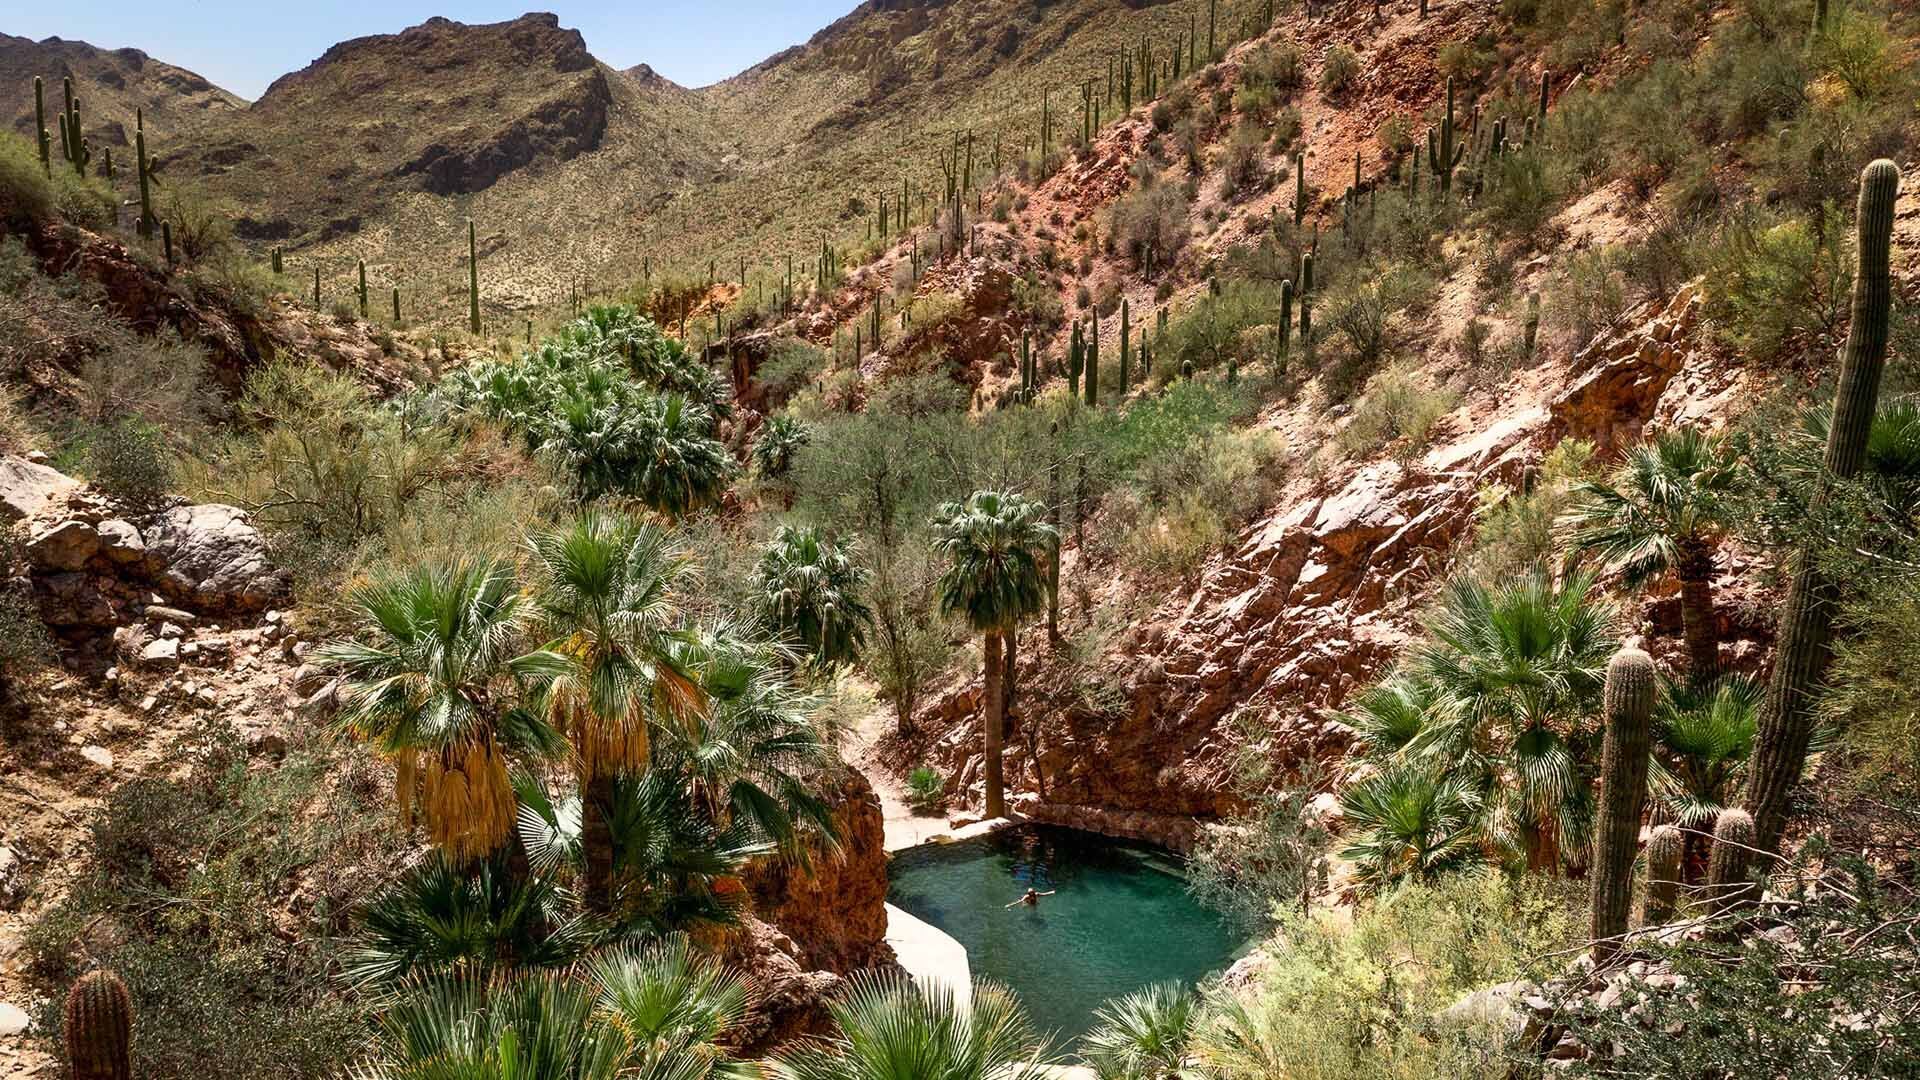 Luxurious all-inclusive resort Castle Hot Springs in Arizona: hot springs, canyon hikes, unique spa, and magnificent desert landscapes